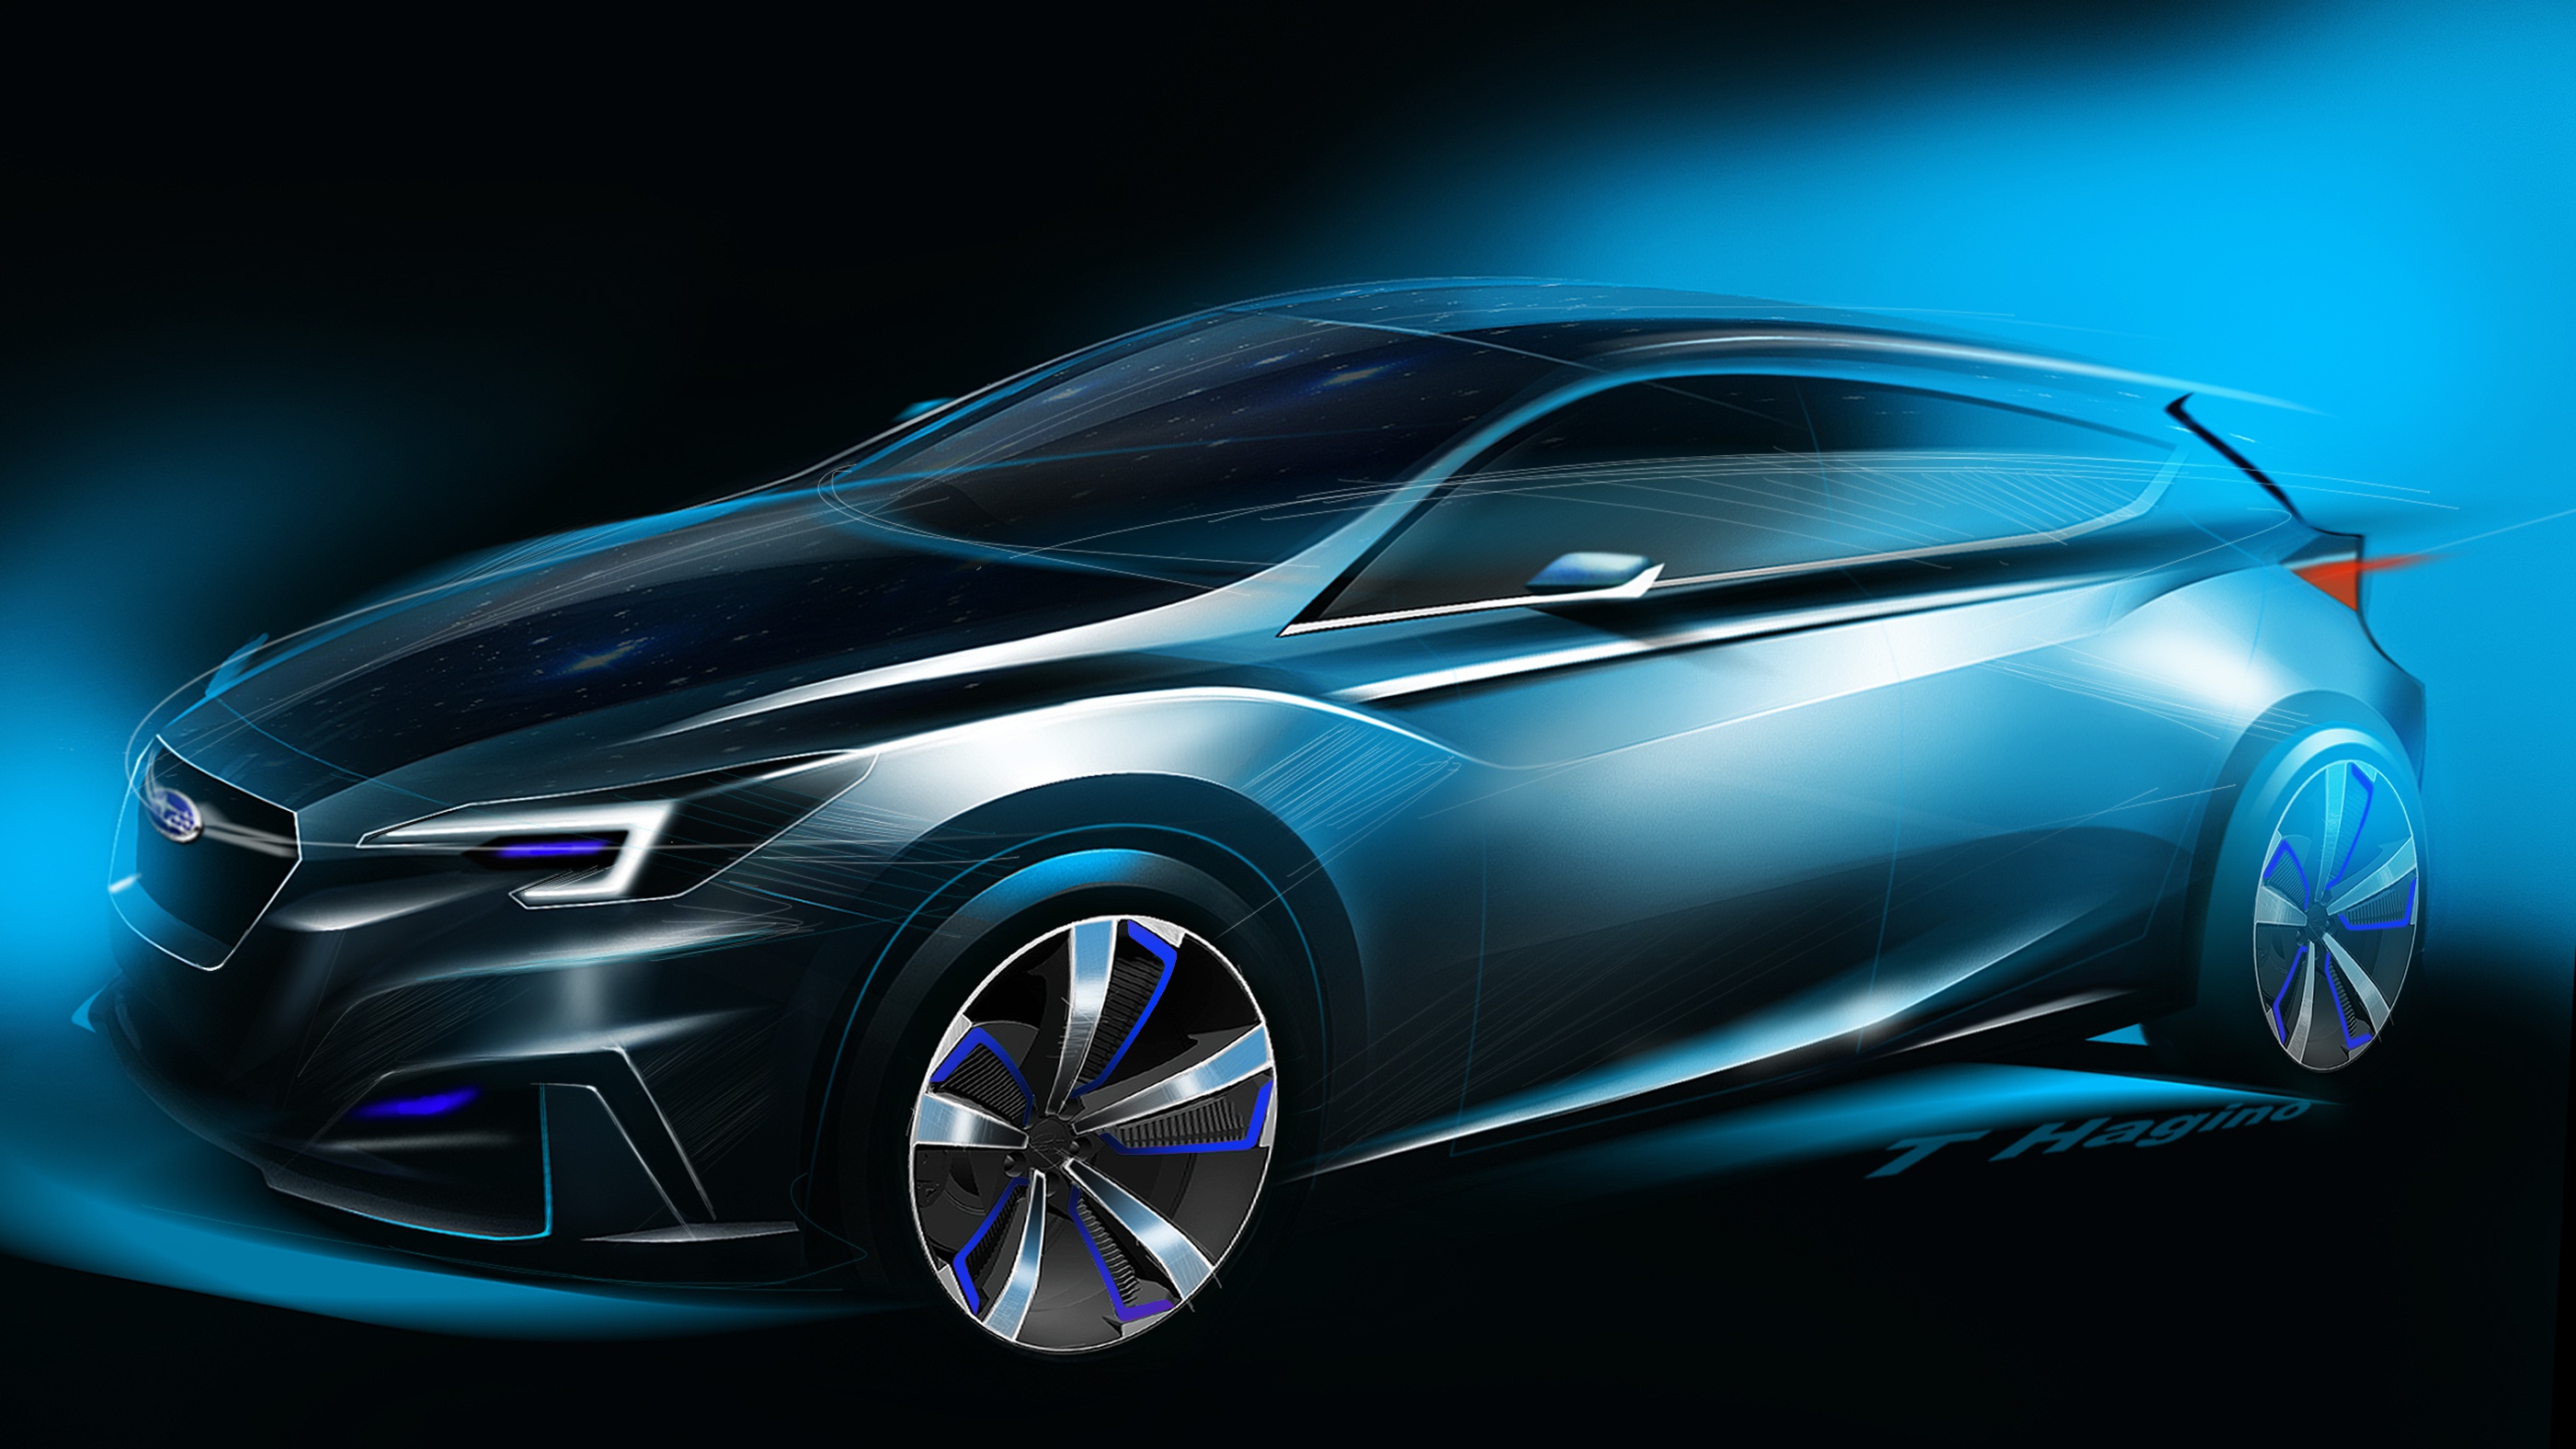 News - Subaru’s 1st Full EV To Debut In 2020 As New Variant